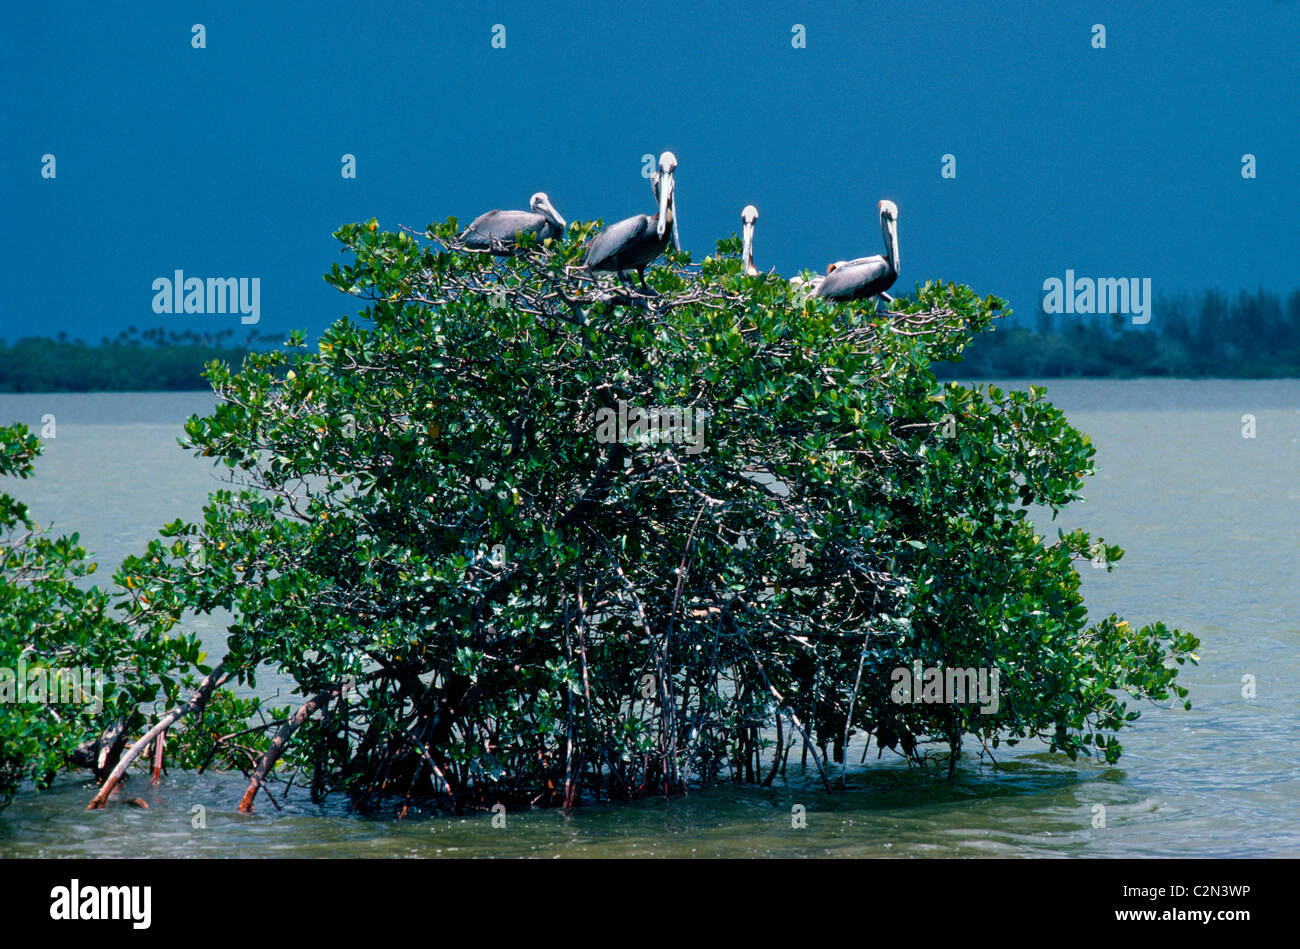 Brown Pelicans rest on a mangrove in the Ten Thousand Islands area of Everglades National Park, a vast wetlands wilderness in south Florida, USA. Stock Photo